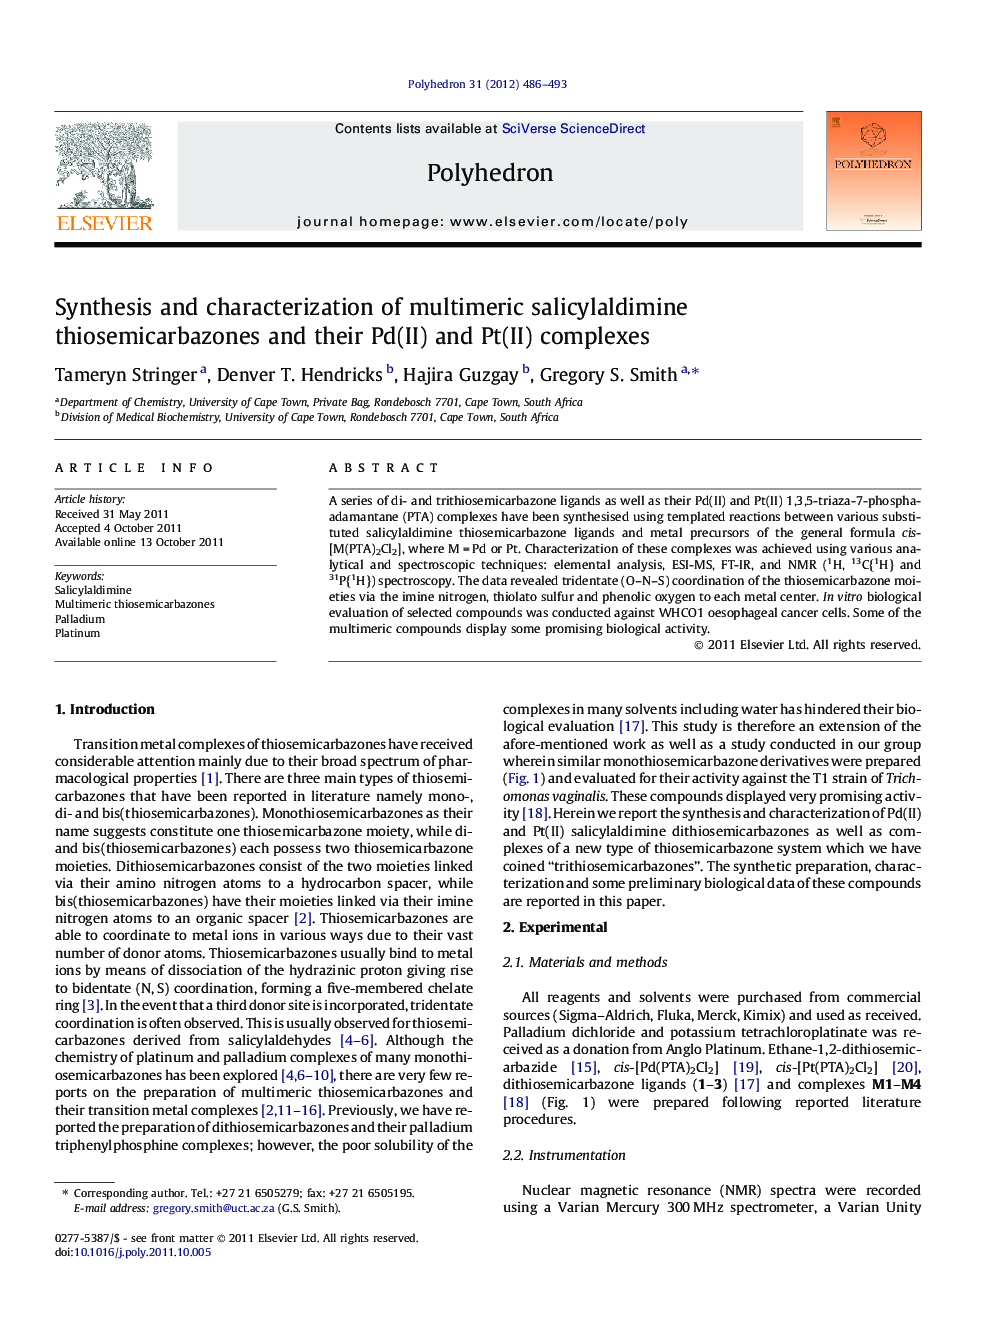 Synthesis and characterization of multimeric salicylaldimine thiosemicarbazones and their Pd(II) and Pt(II) complexes